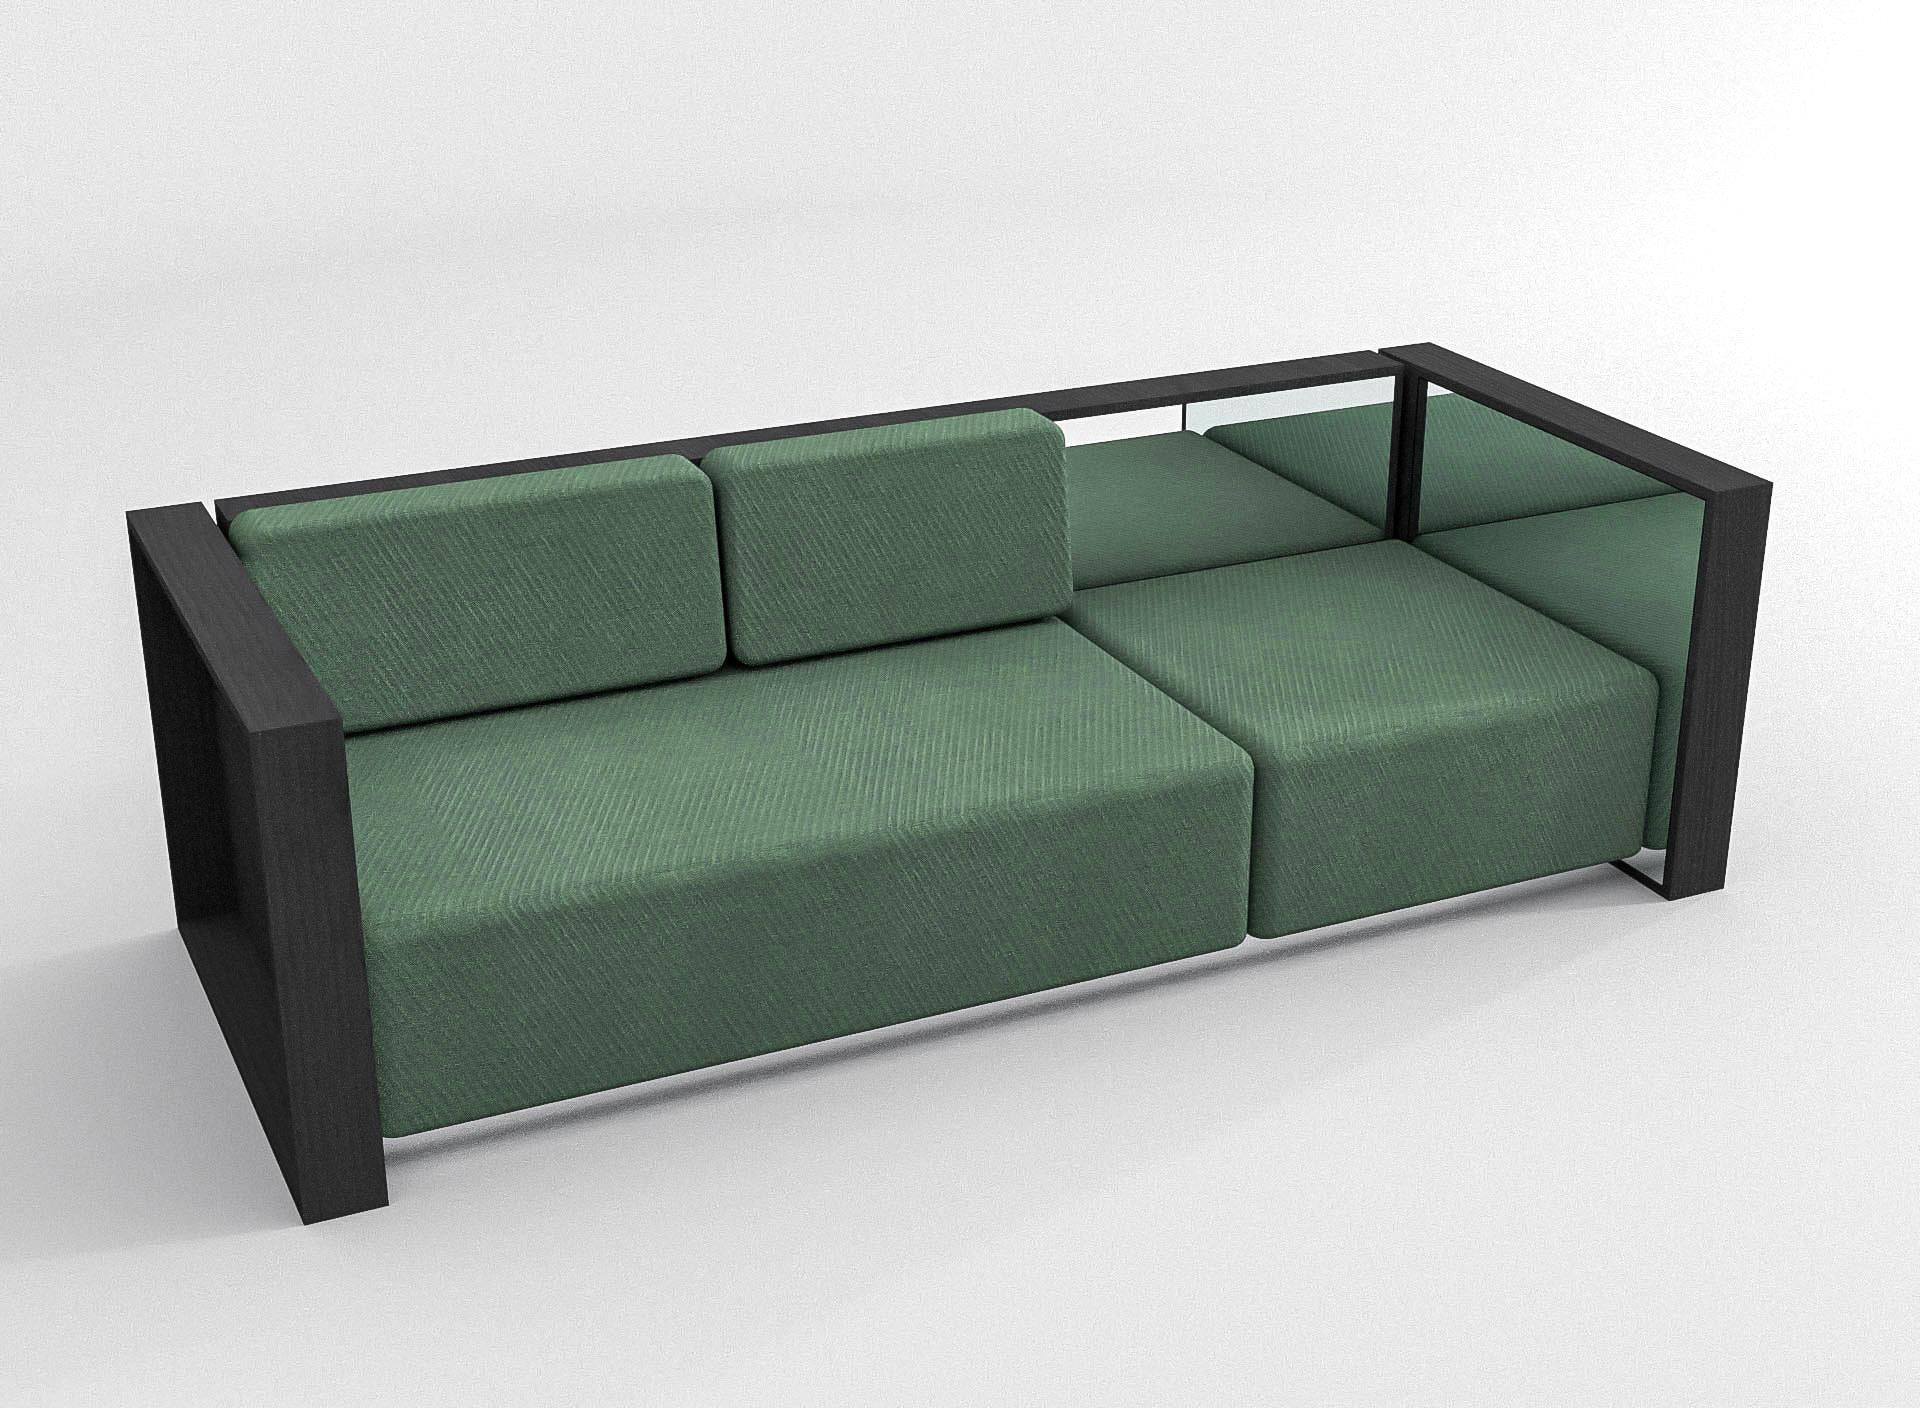 Barh Sofa in Black Ash Wood, Polished Stainless Steel and Green Upholstery In New Condition For Sale In Antwerp, Antwerp